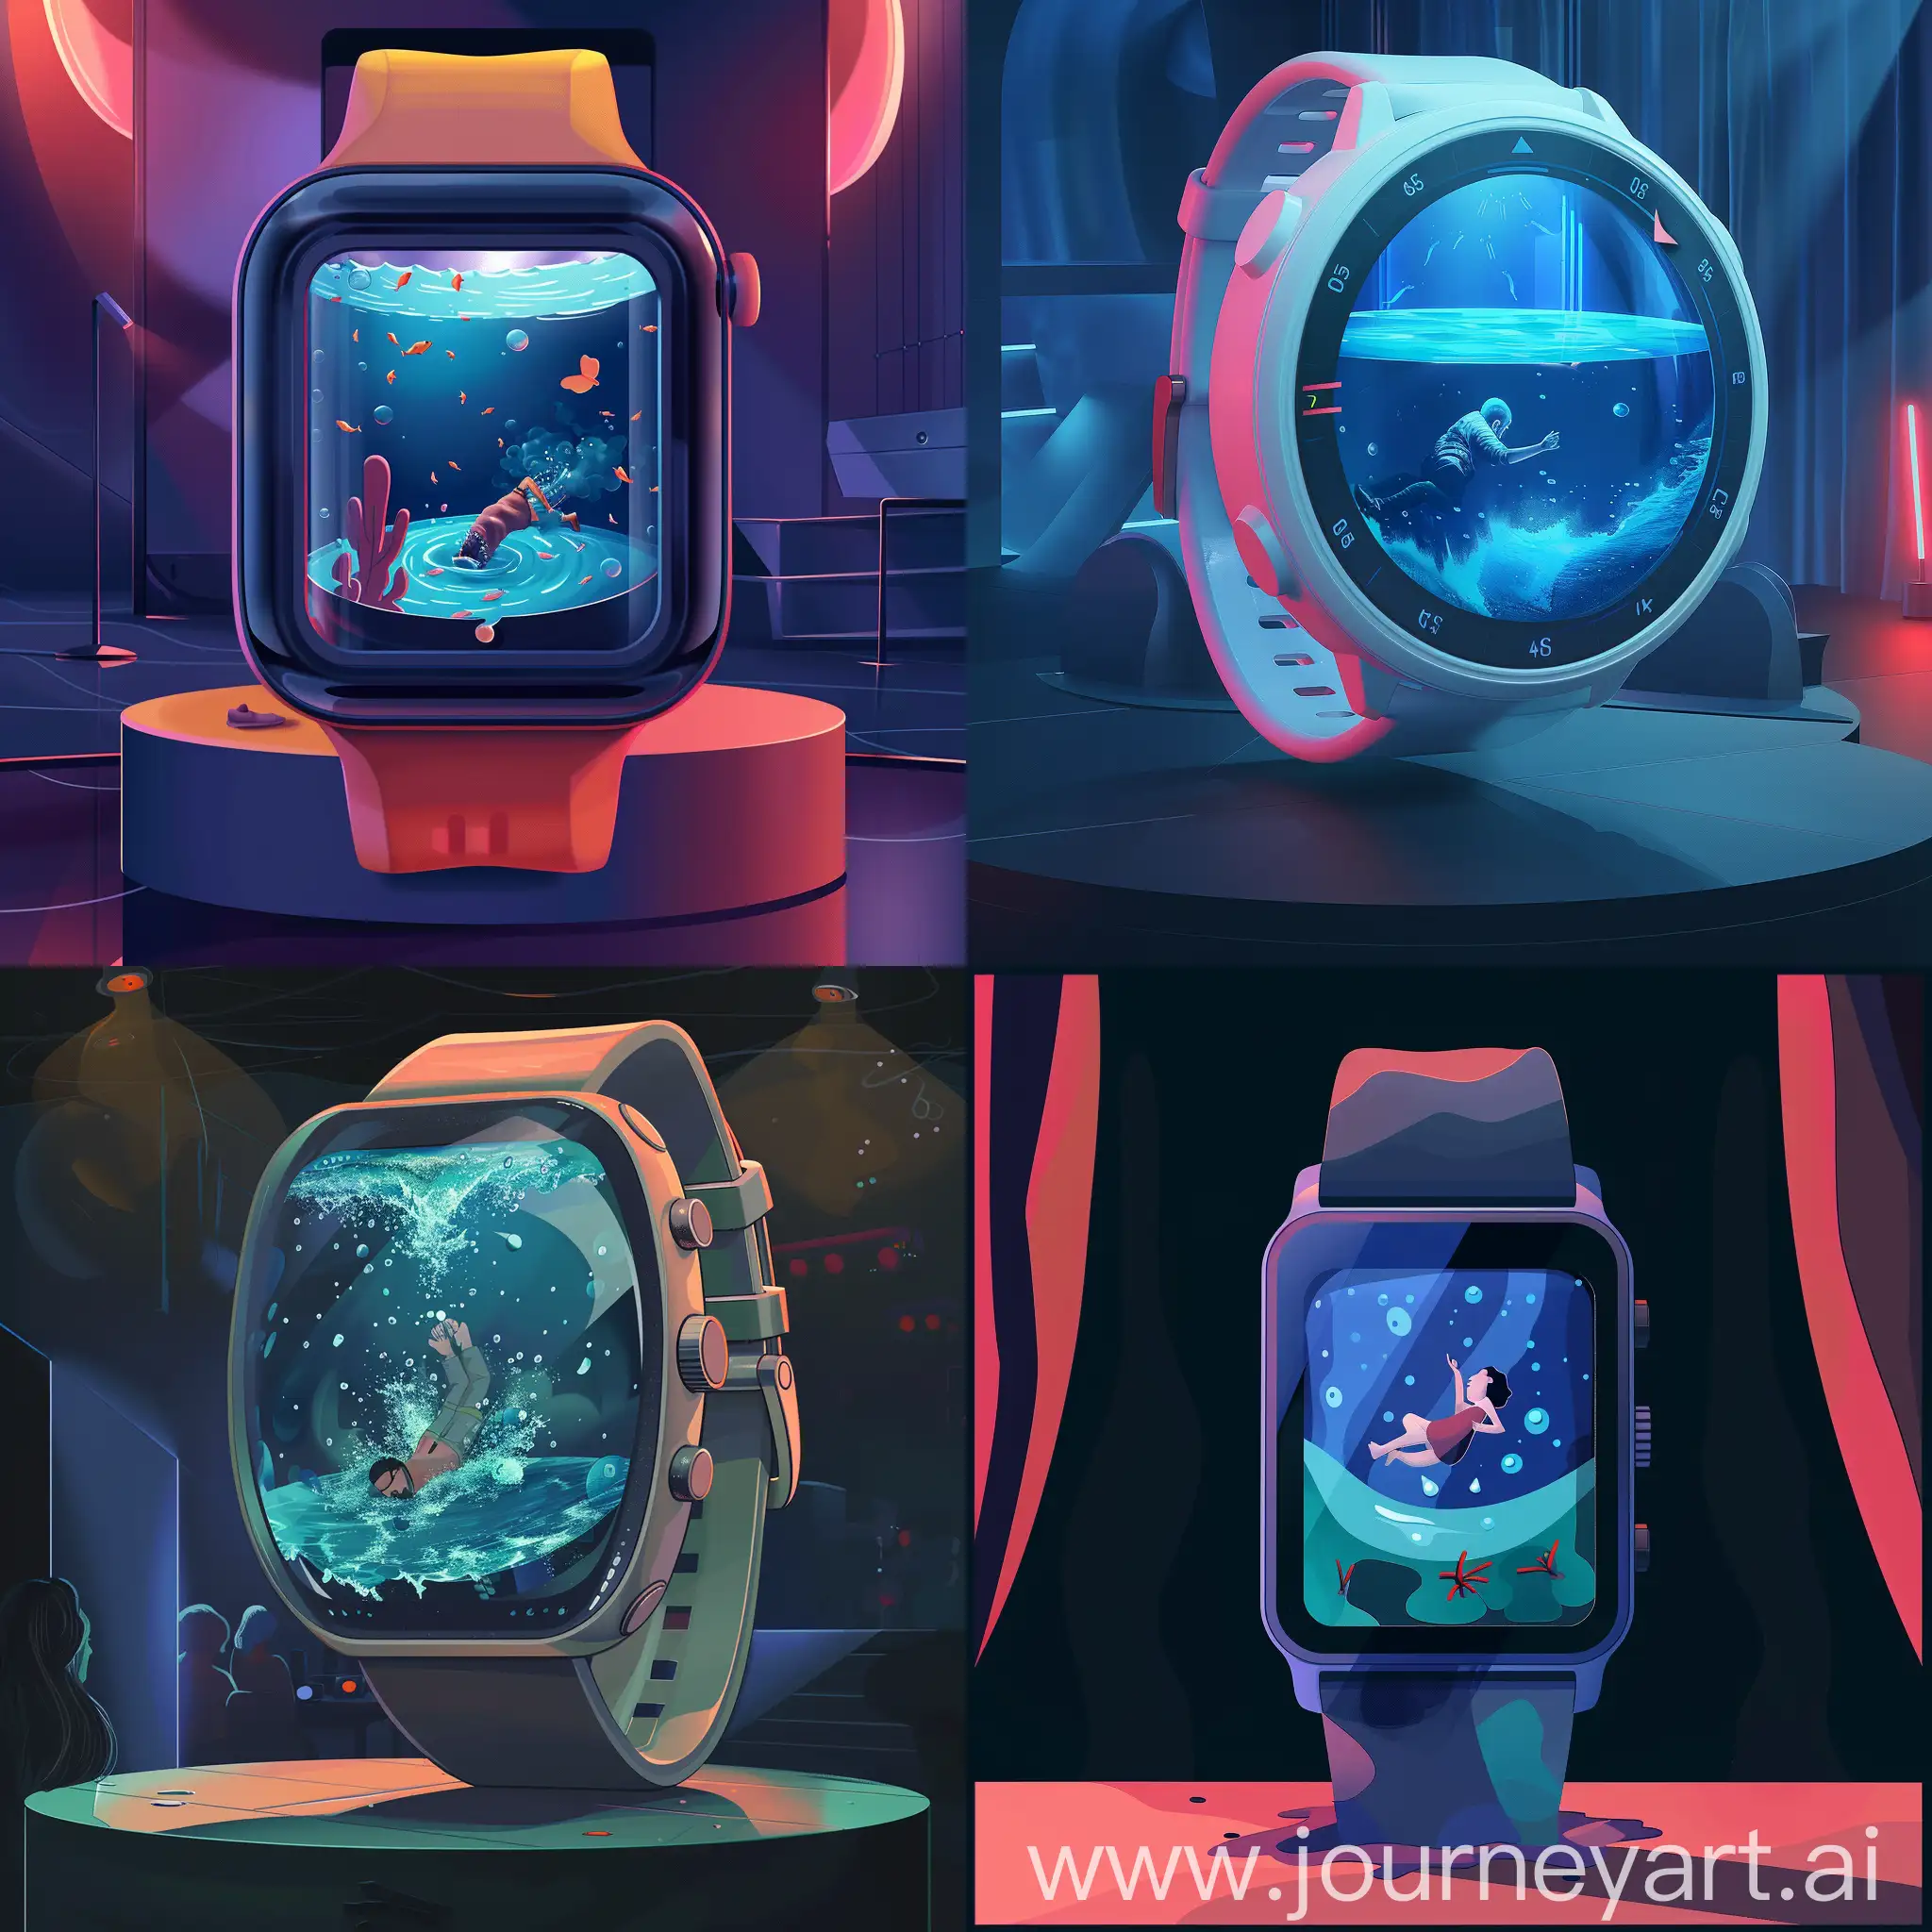 Drowning-Person-Encapsulated-Conceptual-Art-of-a-Smart-Watch-with-Sea-Interior-on-Stage